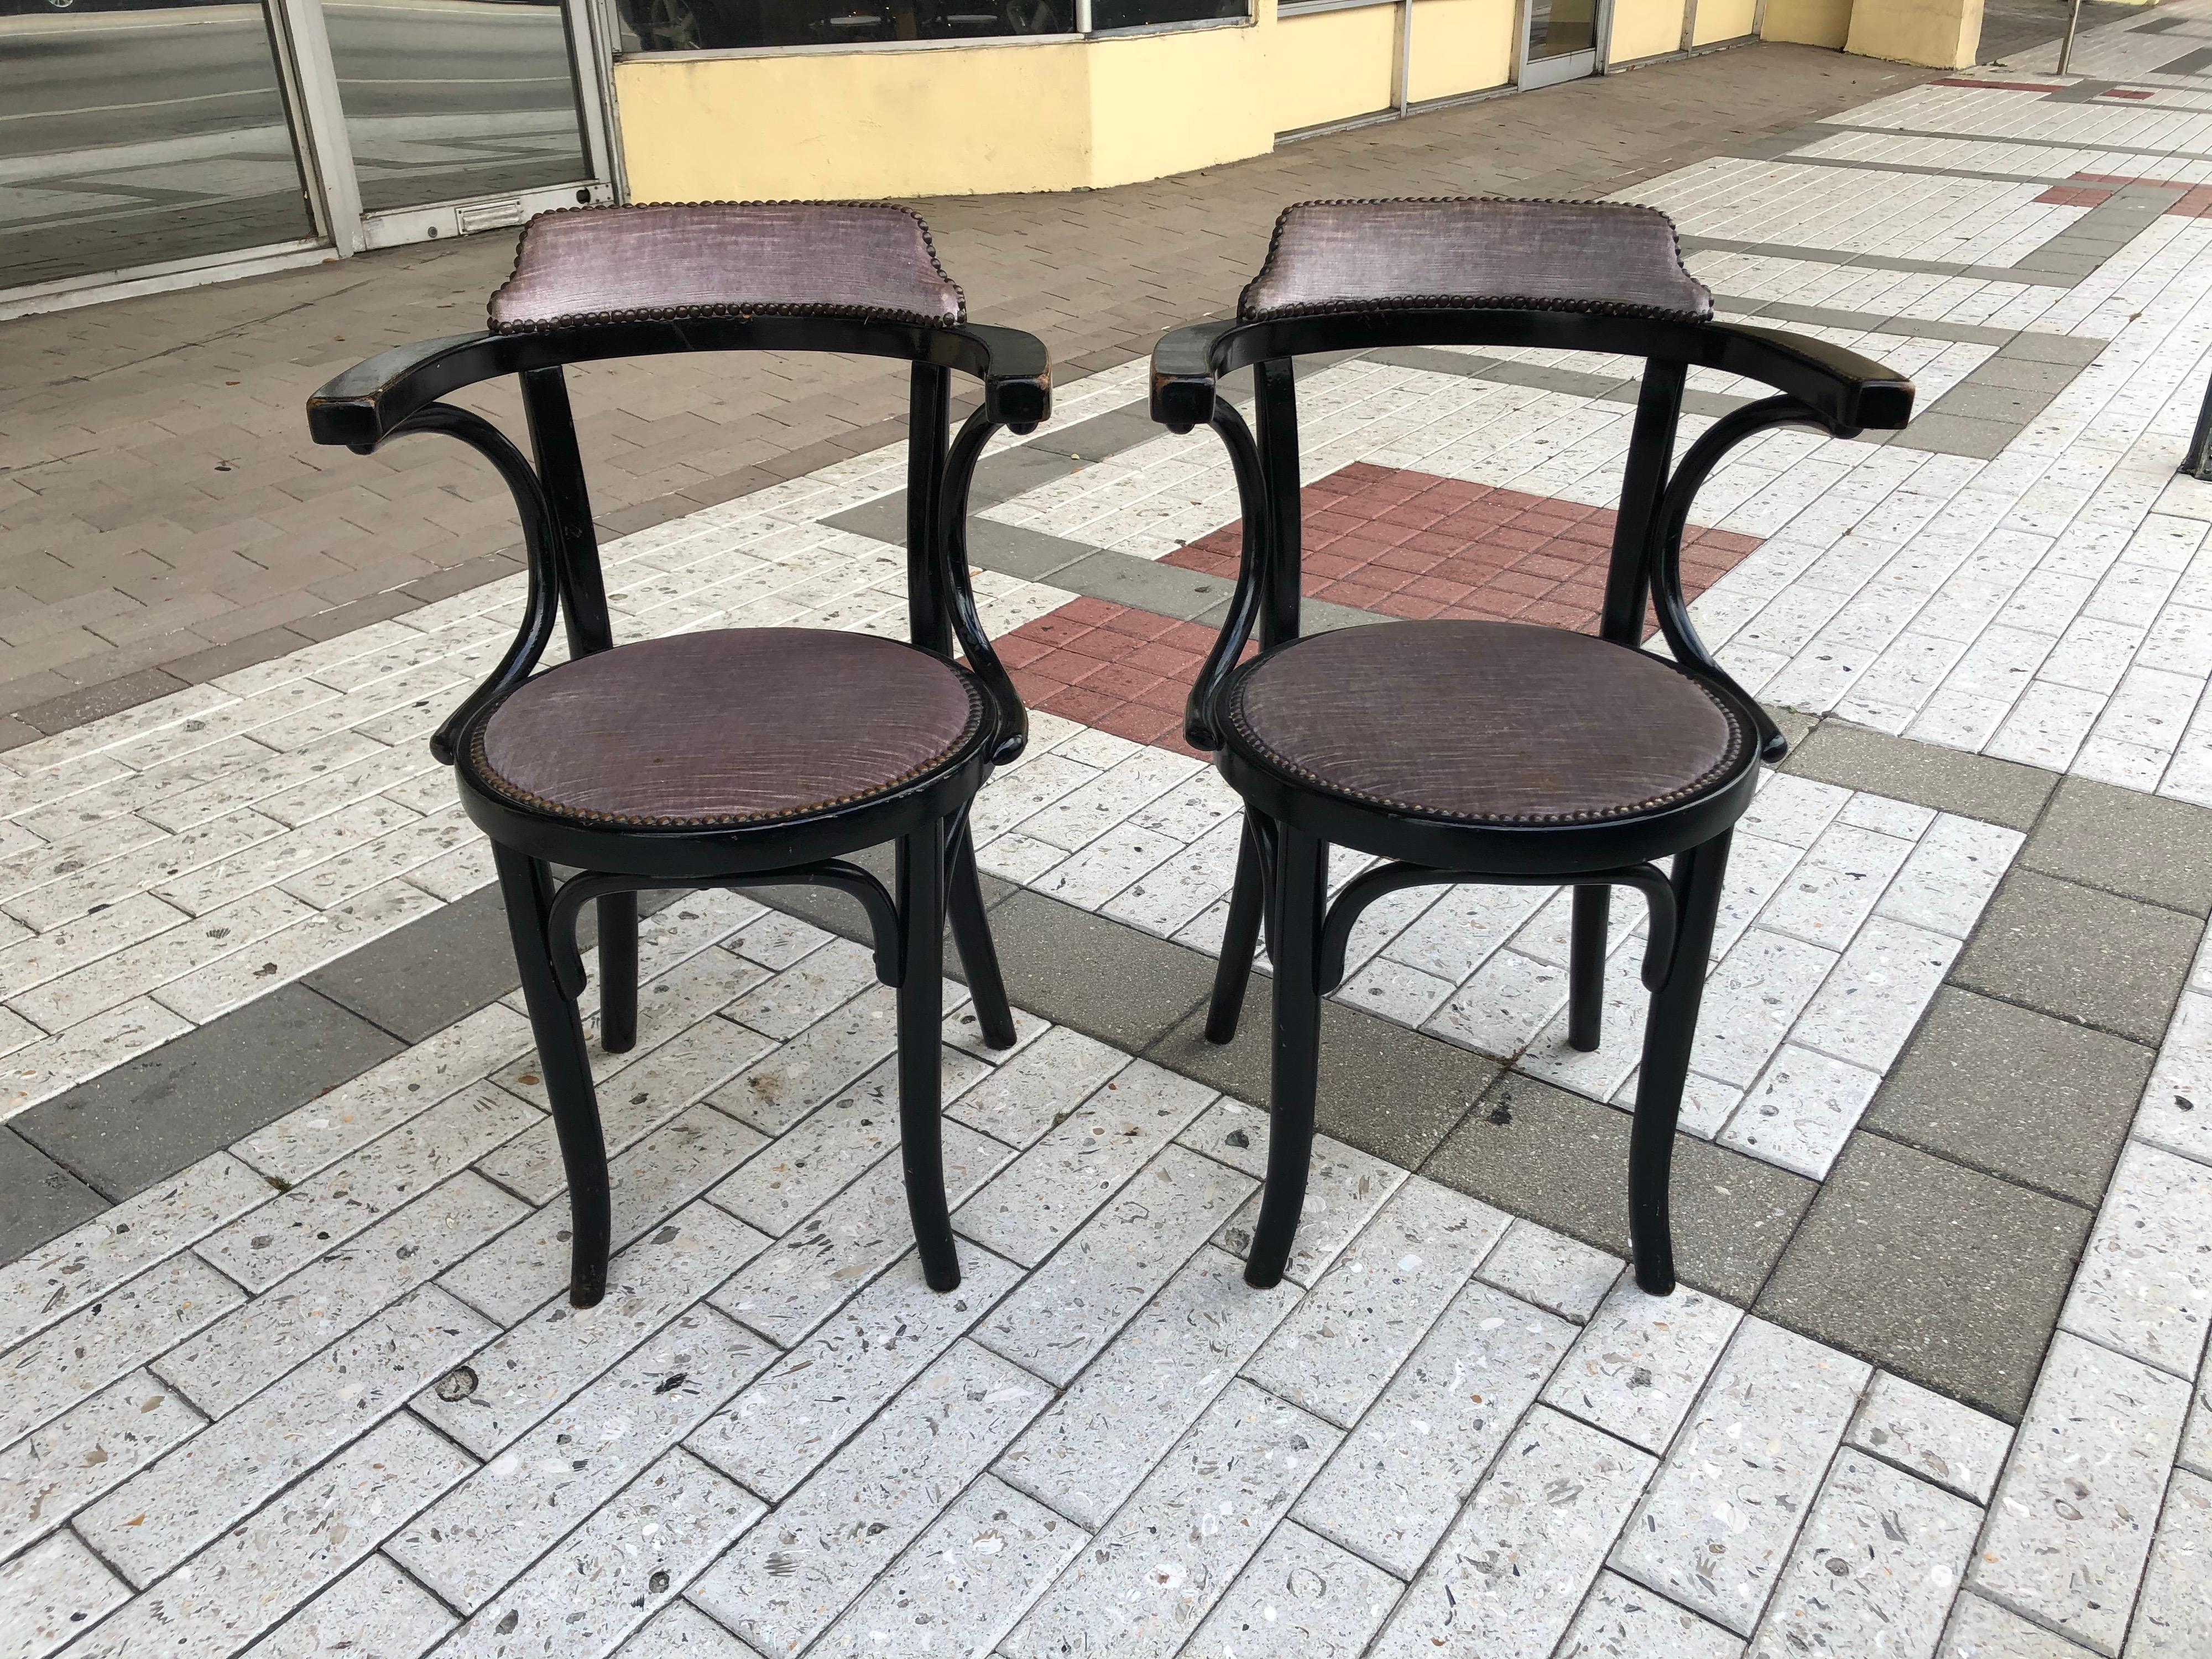 These four black ebonized Thonet chairs from Art Nouveau period are all original and distressed beautifully and appropriately for their age, circa 1920s. They are upholstered in 